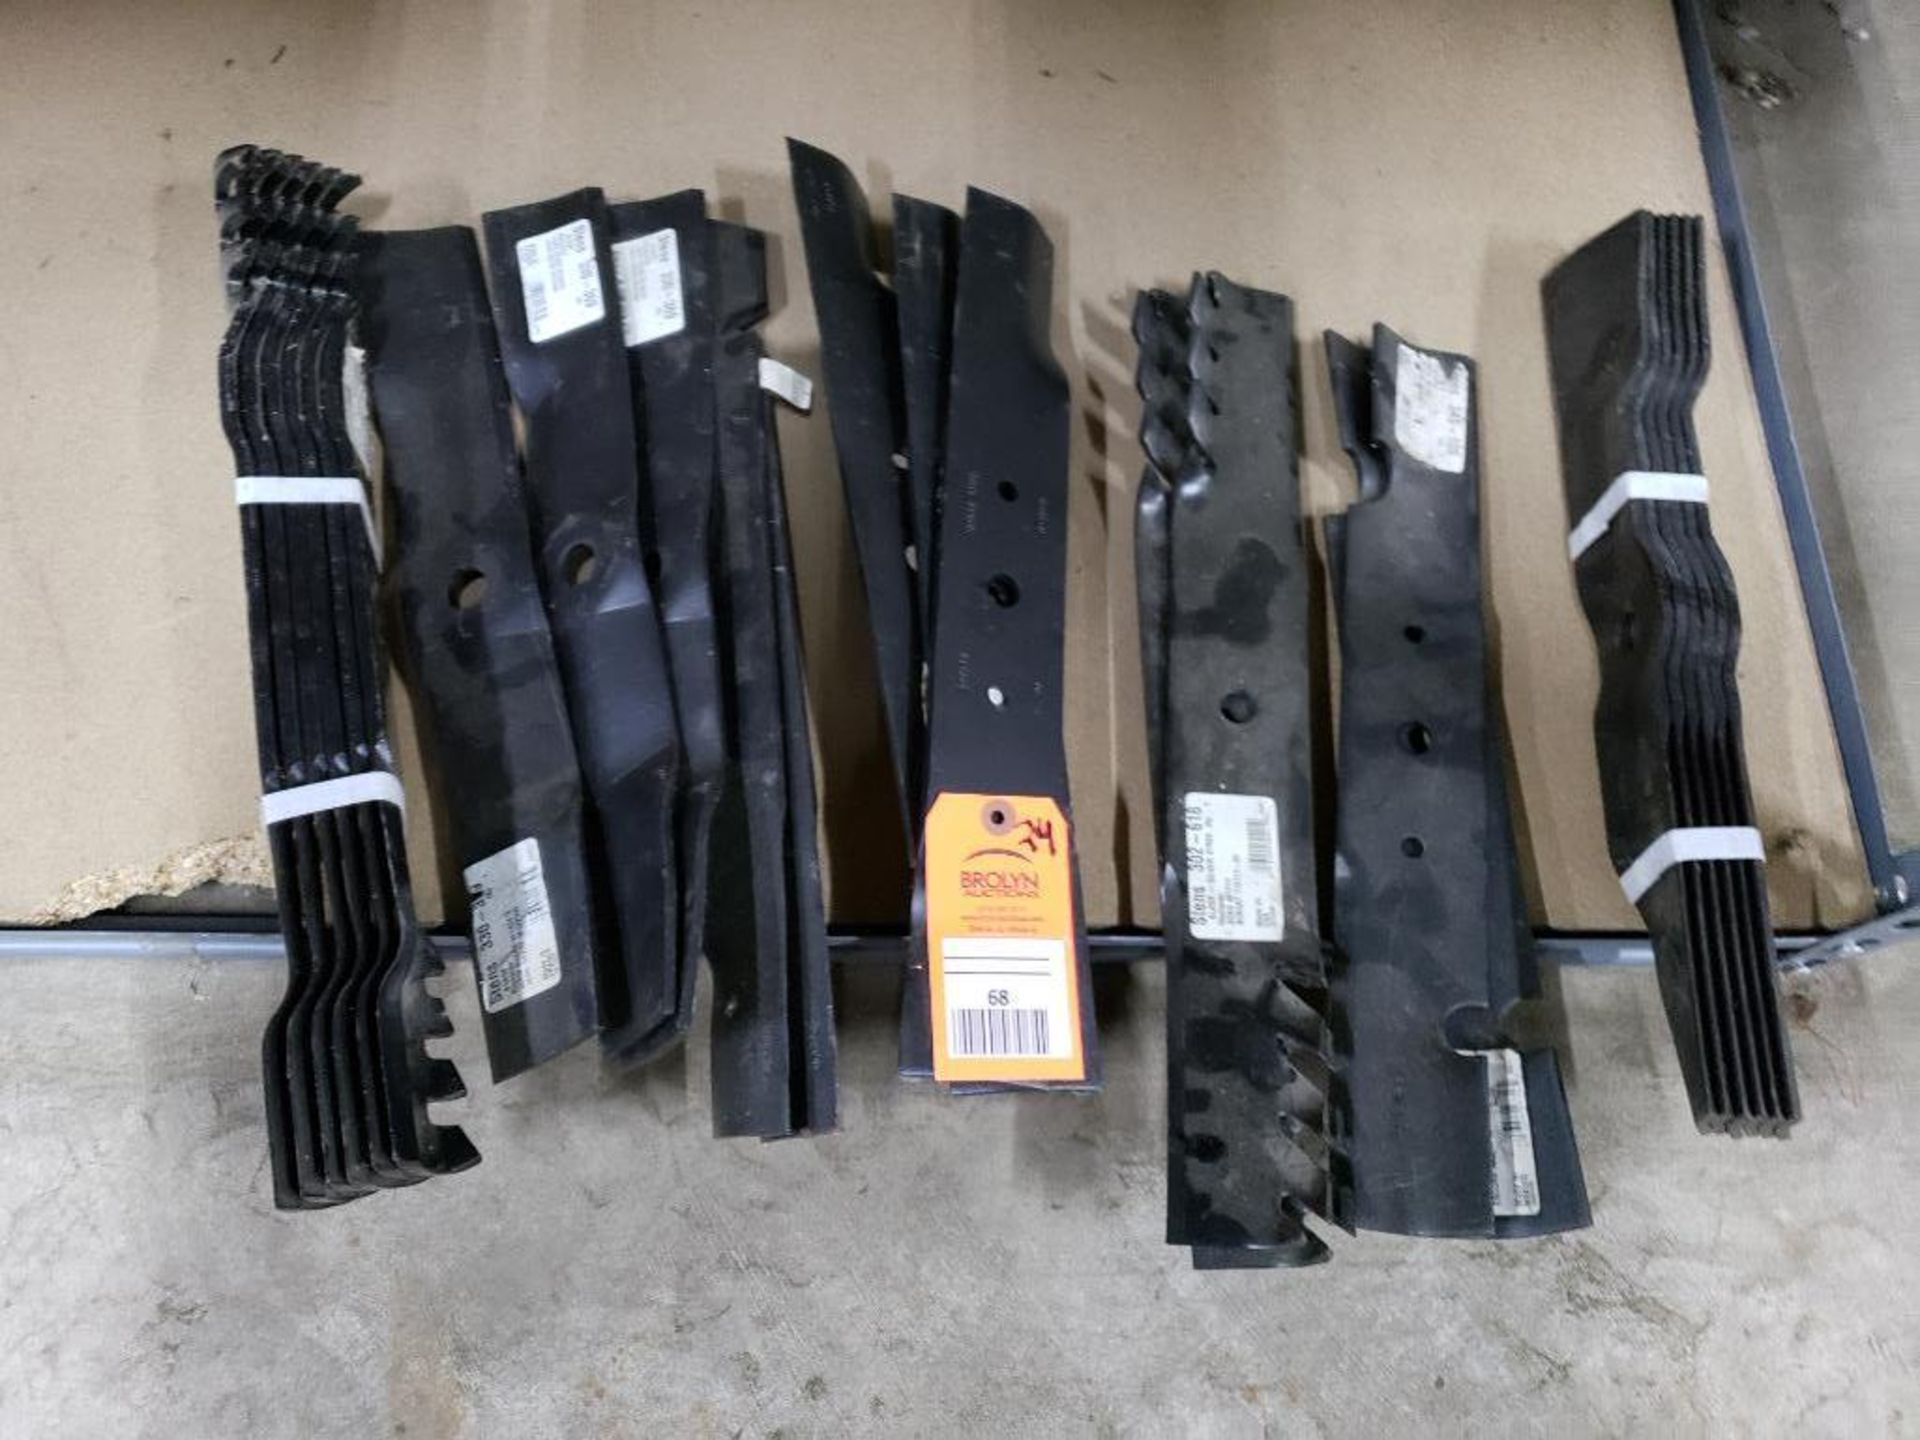 Qty 24 - Assorted mower blades. New old stock.